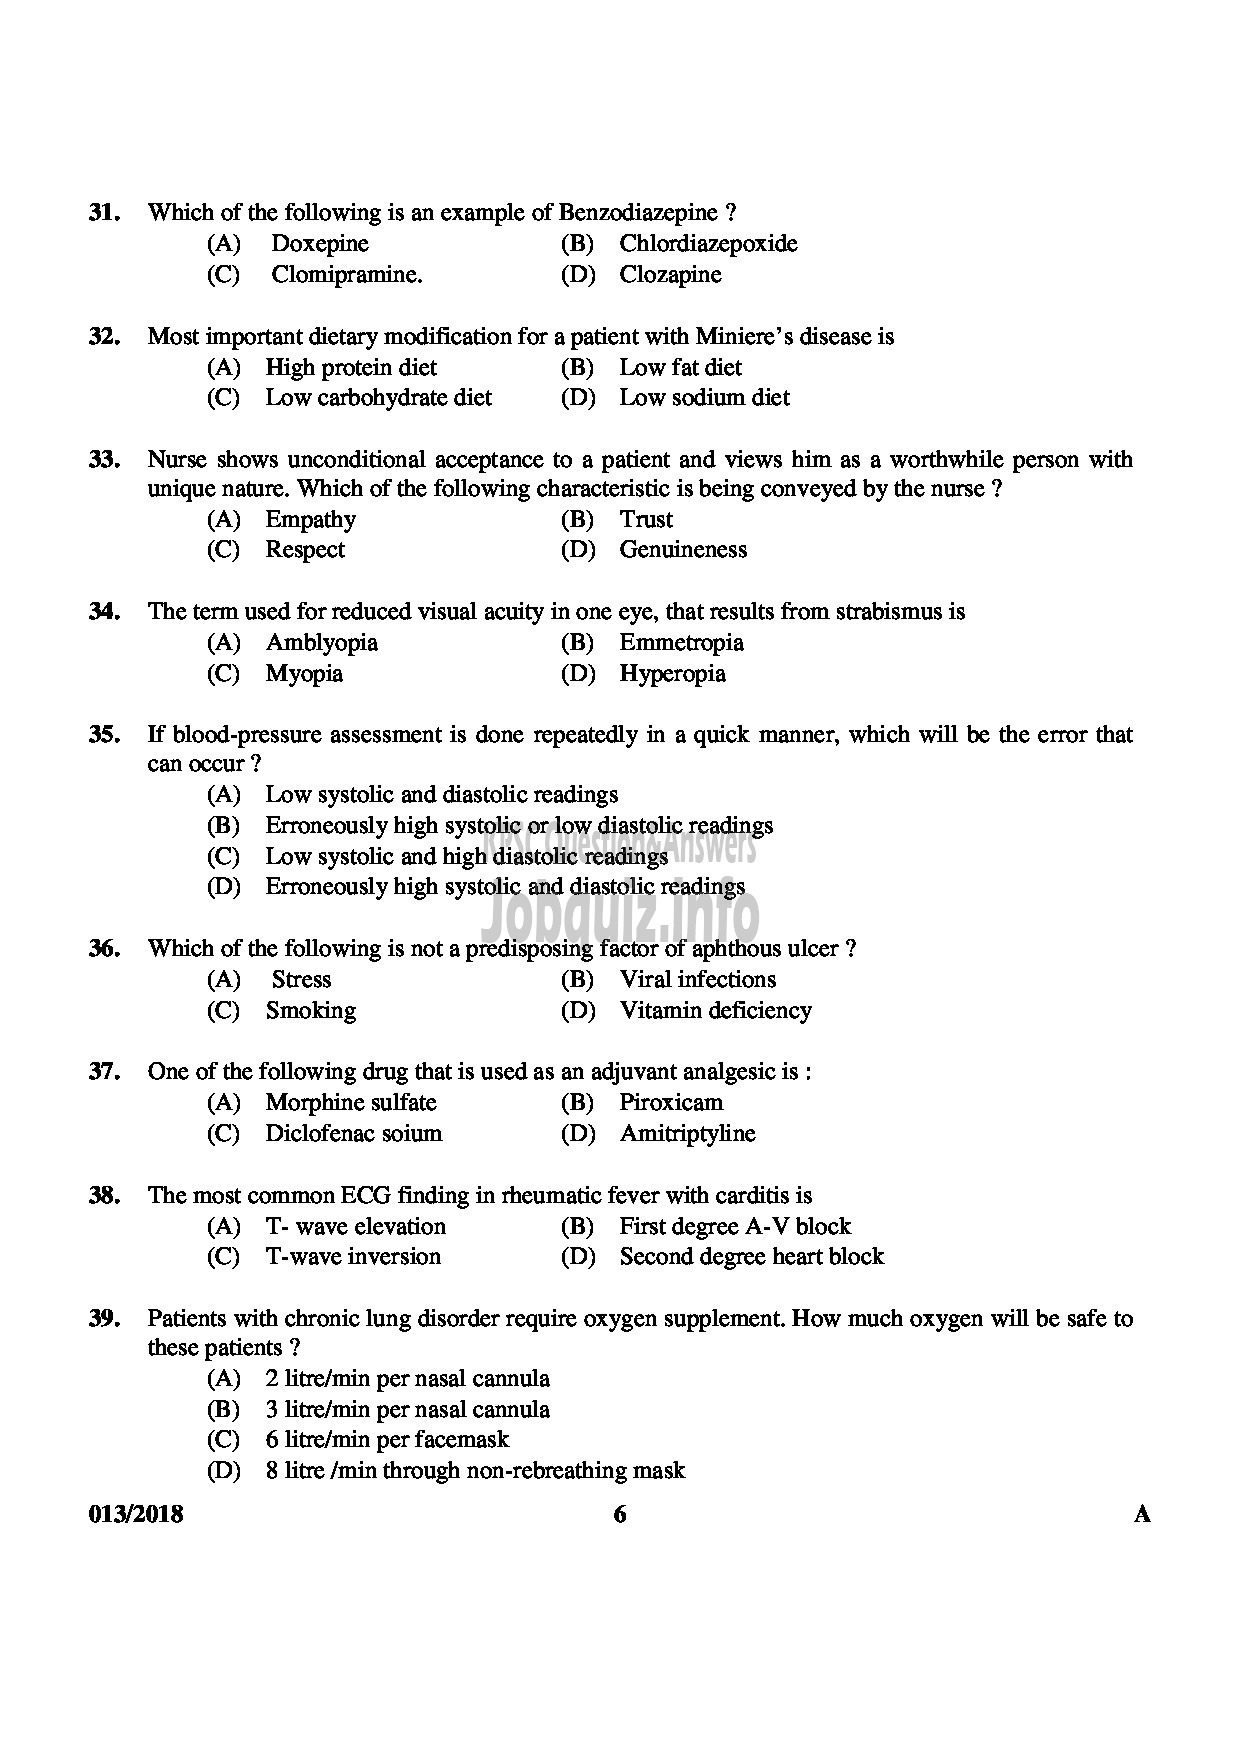 Kerala PSC Question Paper - VOCATIONAL INSTRUCTOR IN DOMESTIC NURSING VHSE-6